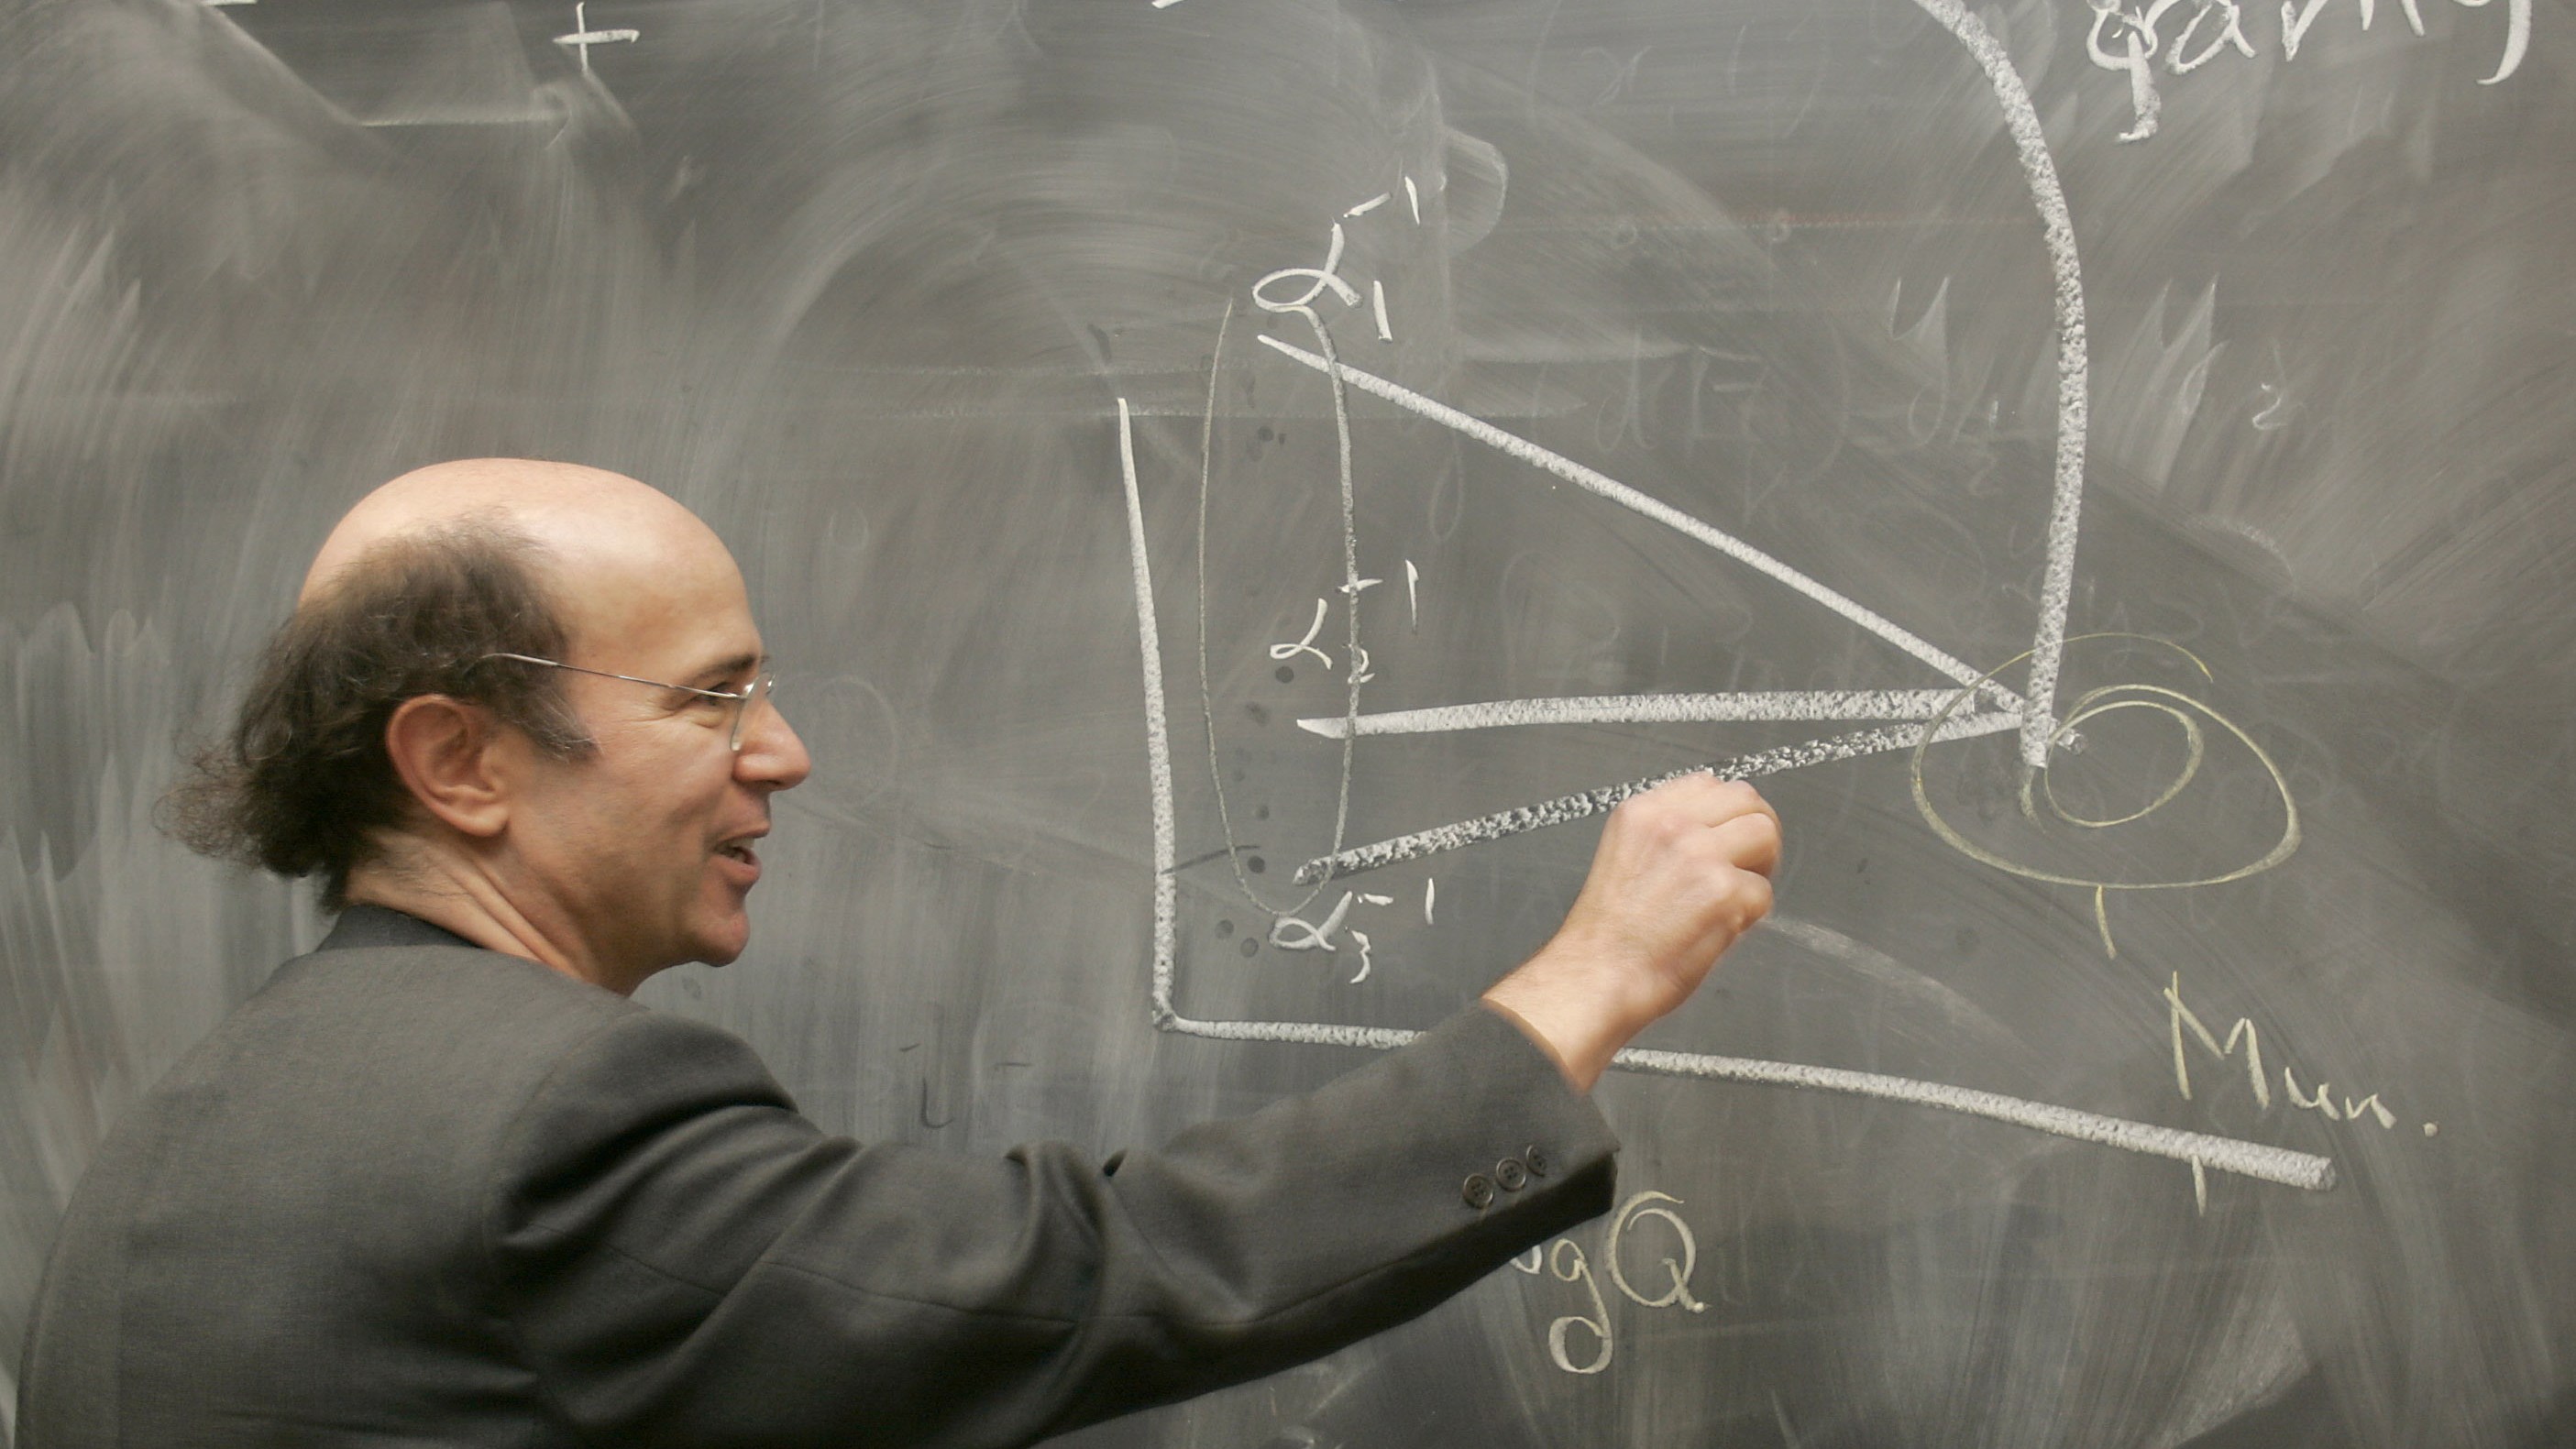 Frank Wilczek was awarded the Nobel prize for physics in 2004